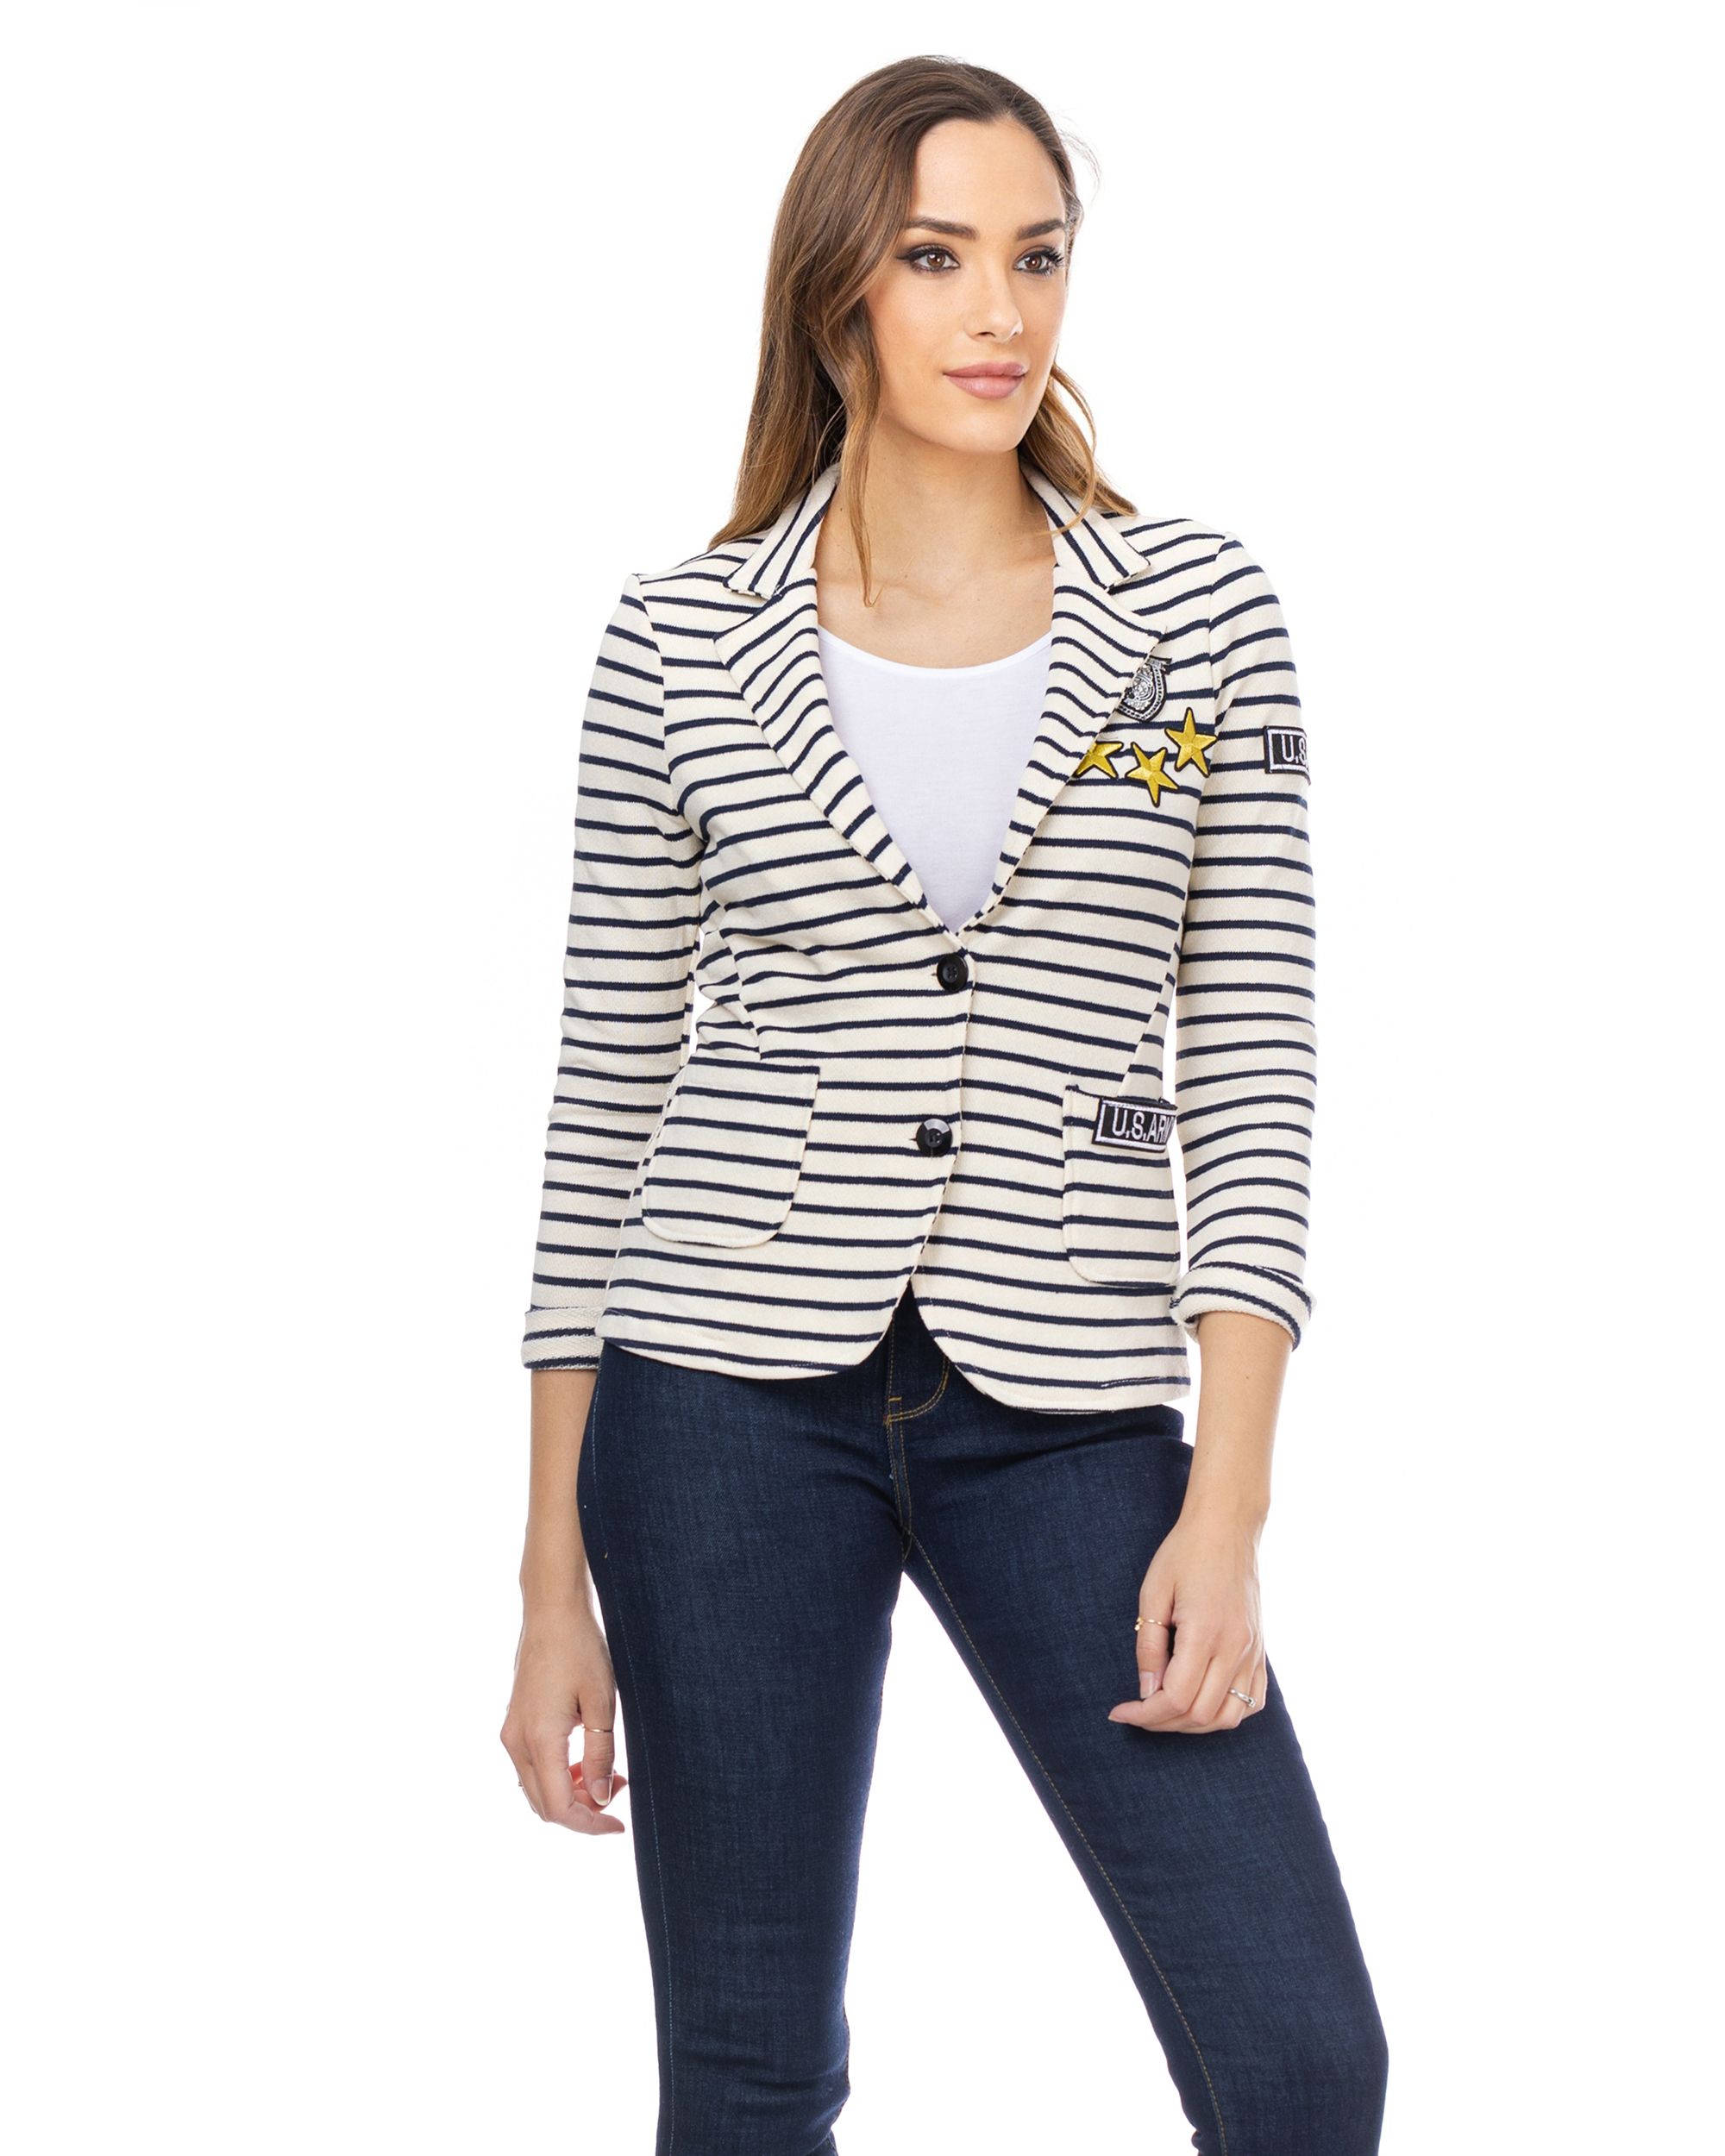 Striped jacket with buttons, pockets and stickers